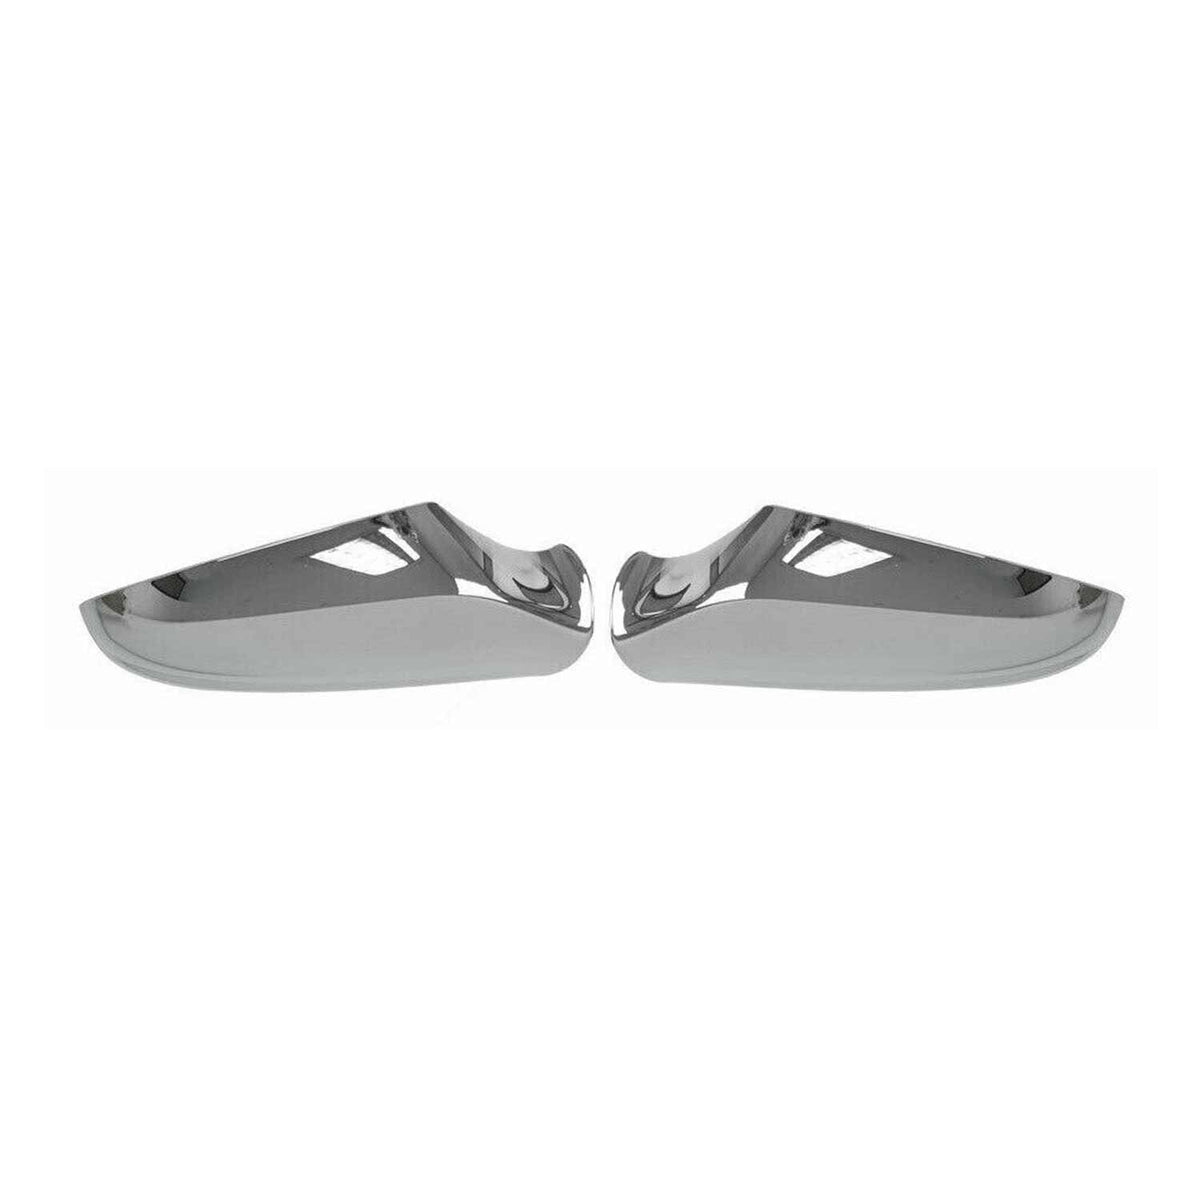 Mirror caps mirror cover for Opel Astra H 2004-2009 chrome ABS silver 2 pieces